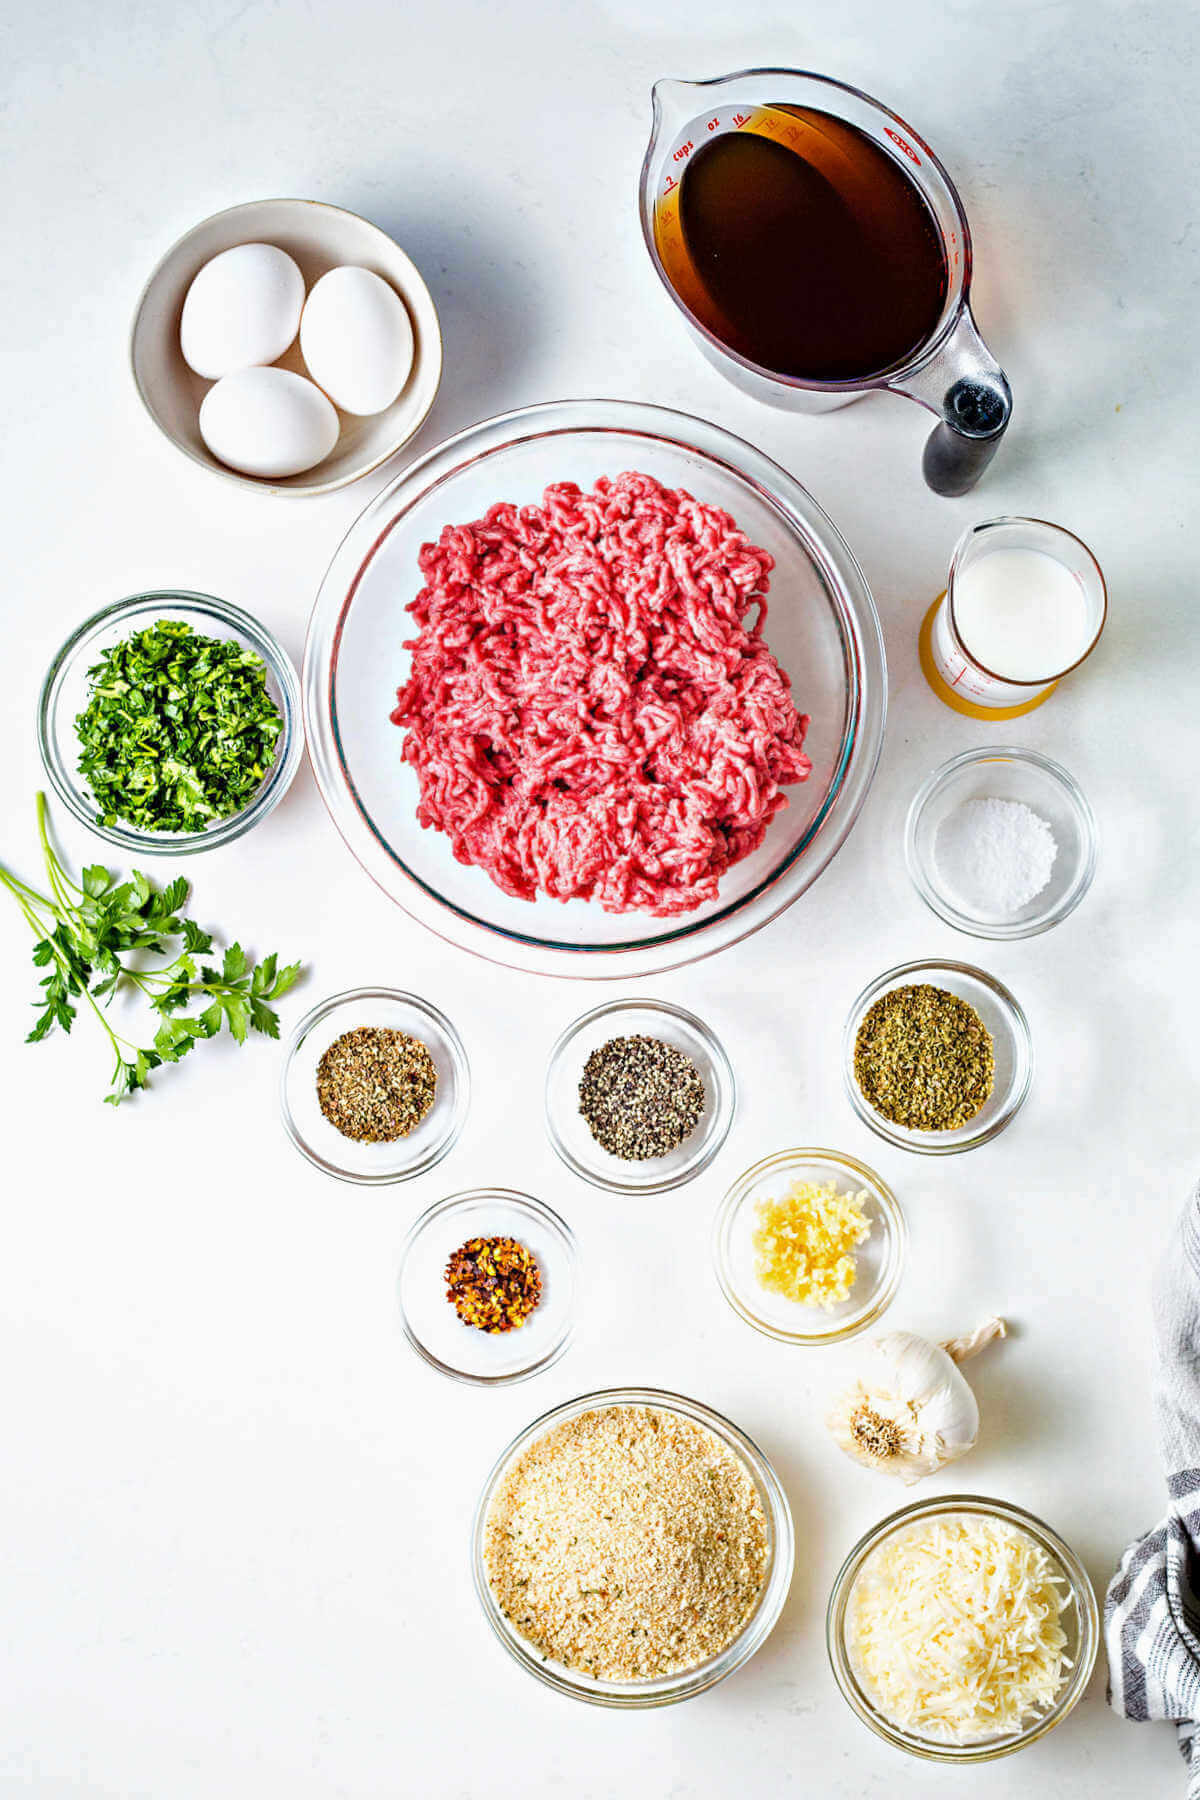 ingredients for making meatballs on a table.